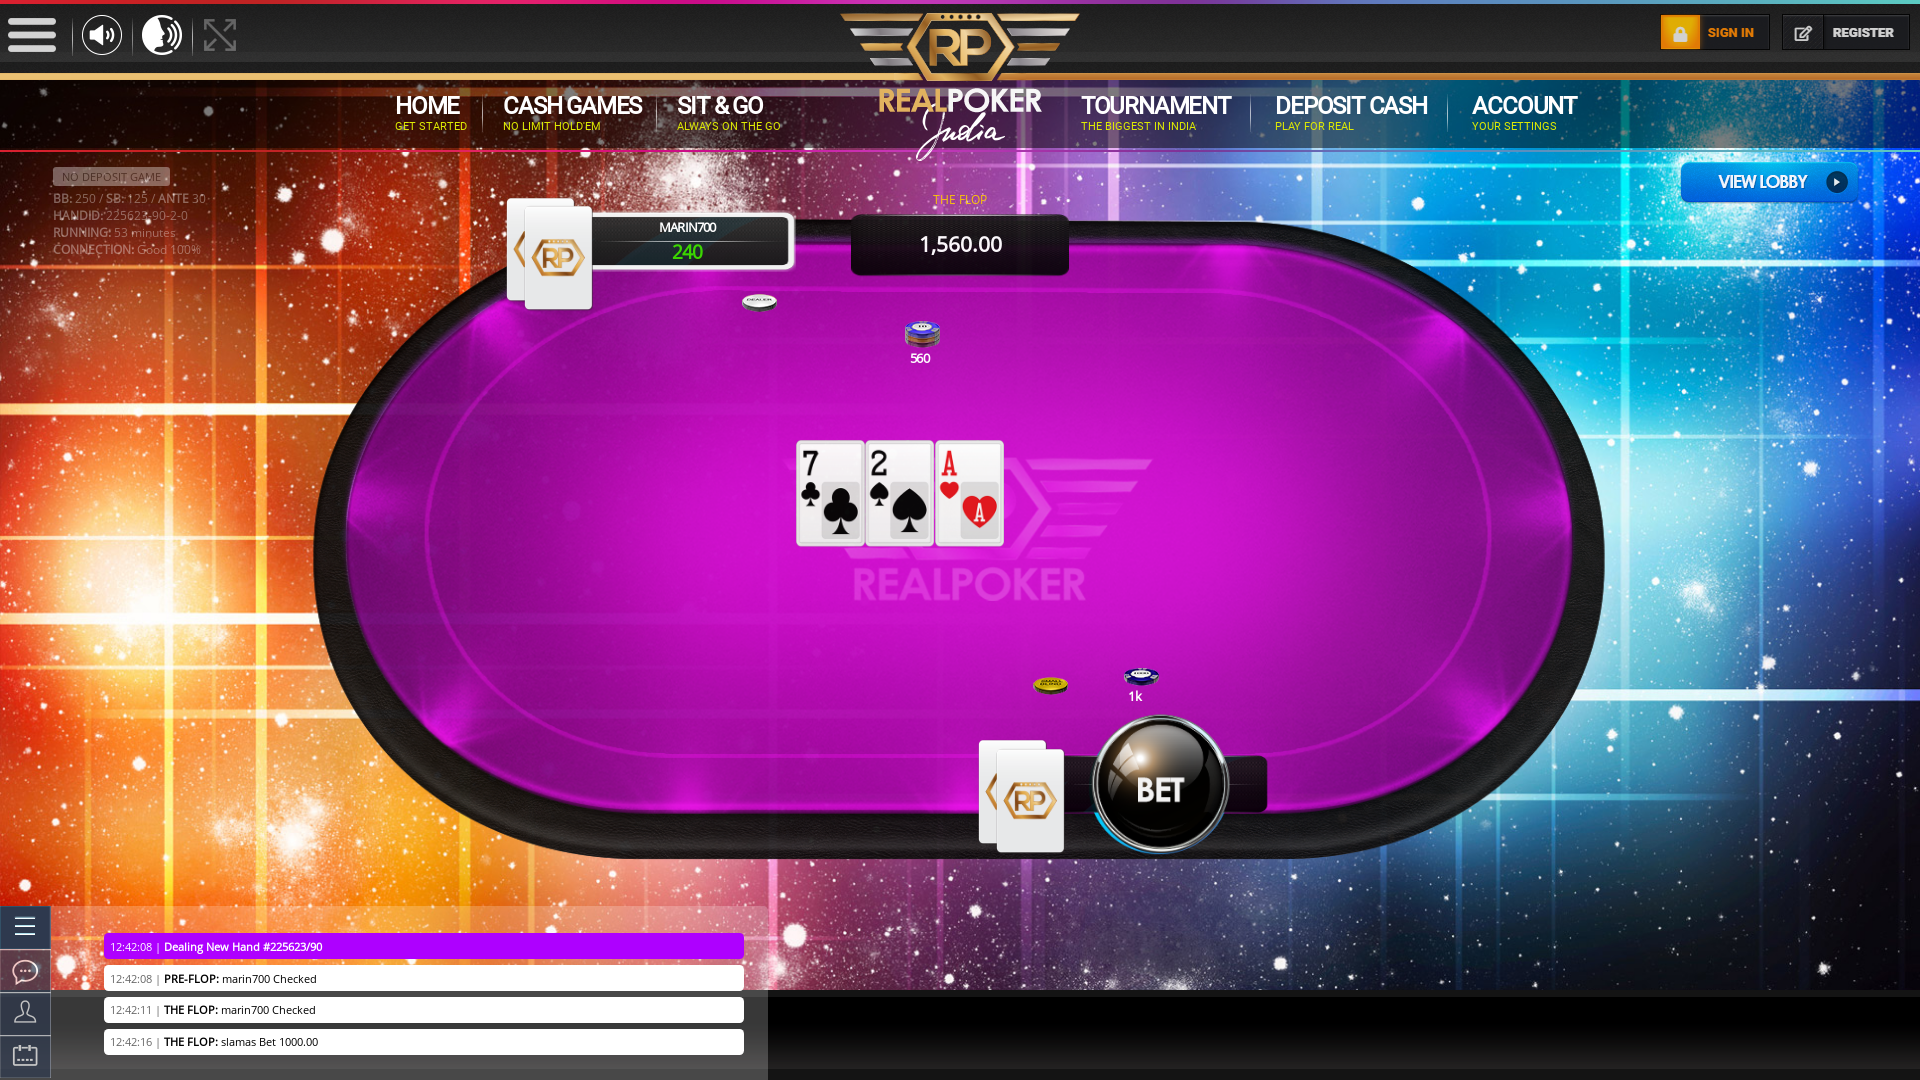 Mathikere, Bangalore poker table on a 10 player table in the 52nd minute of the game